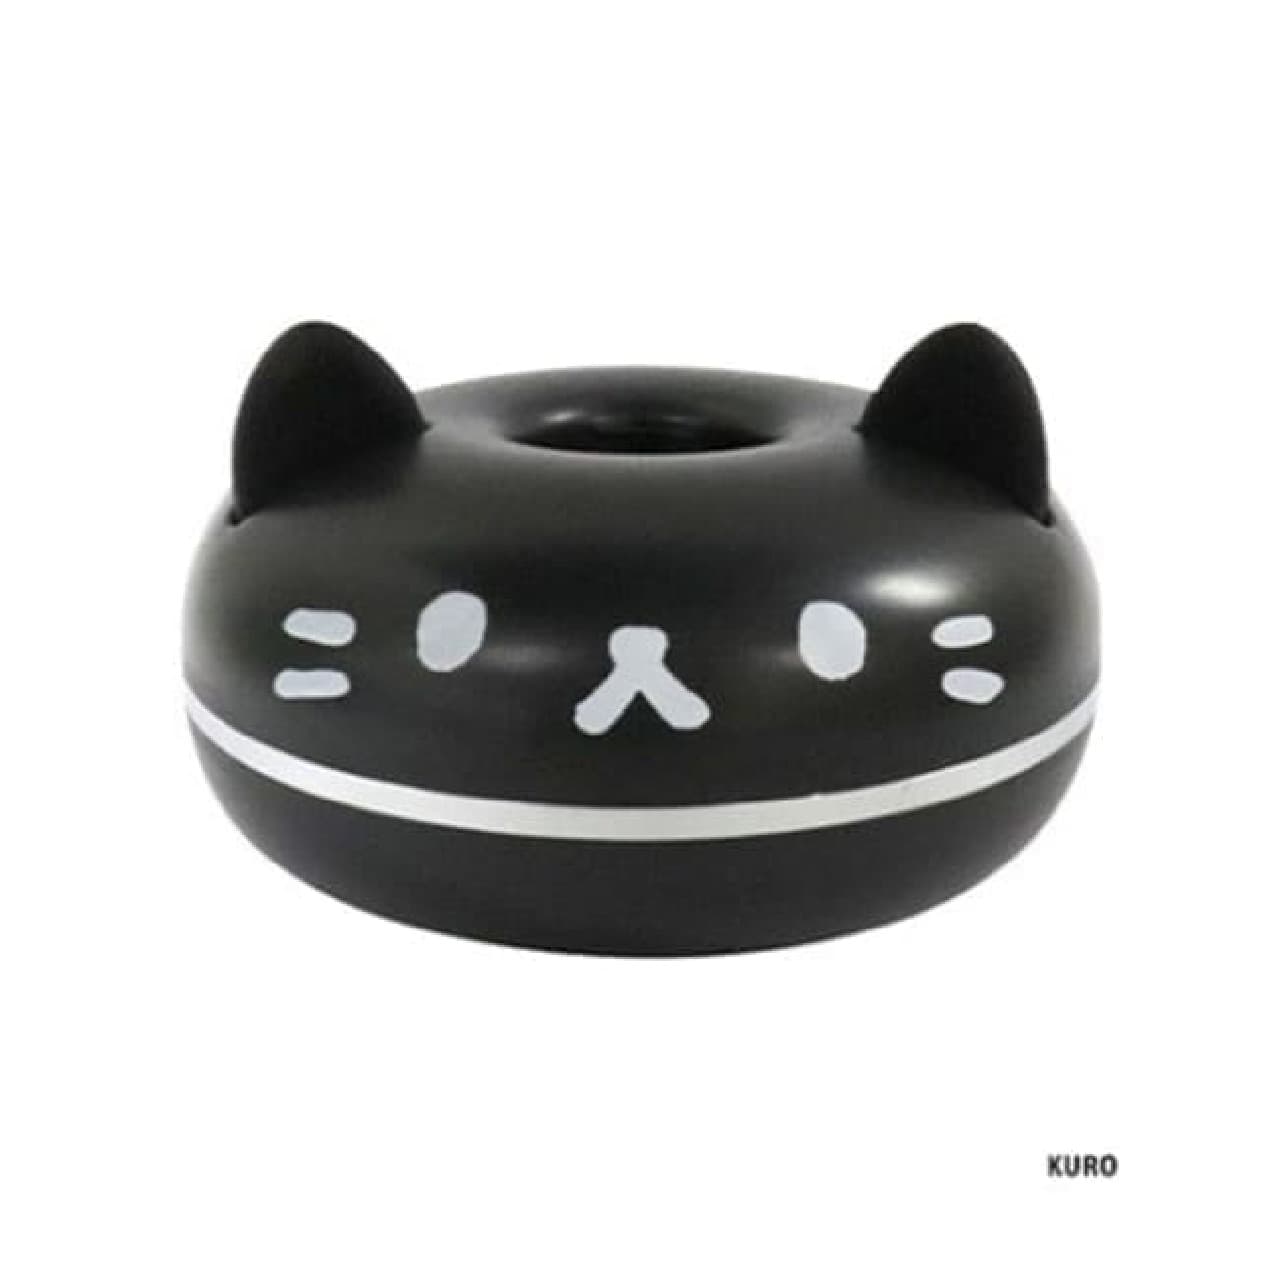 Cat-type portable humidifier becomes Villevan --Easy water supply with PET bottle